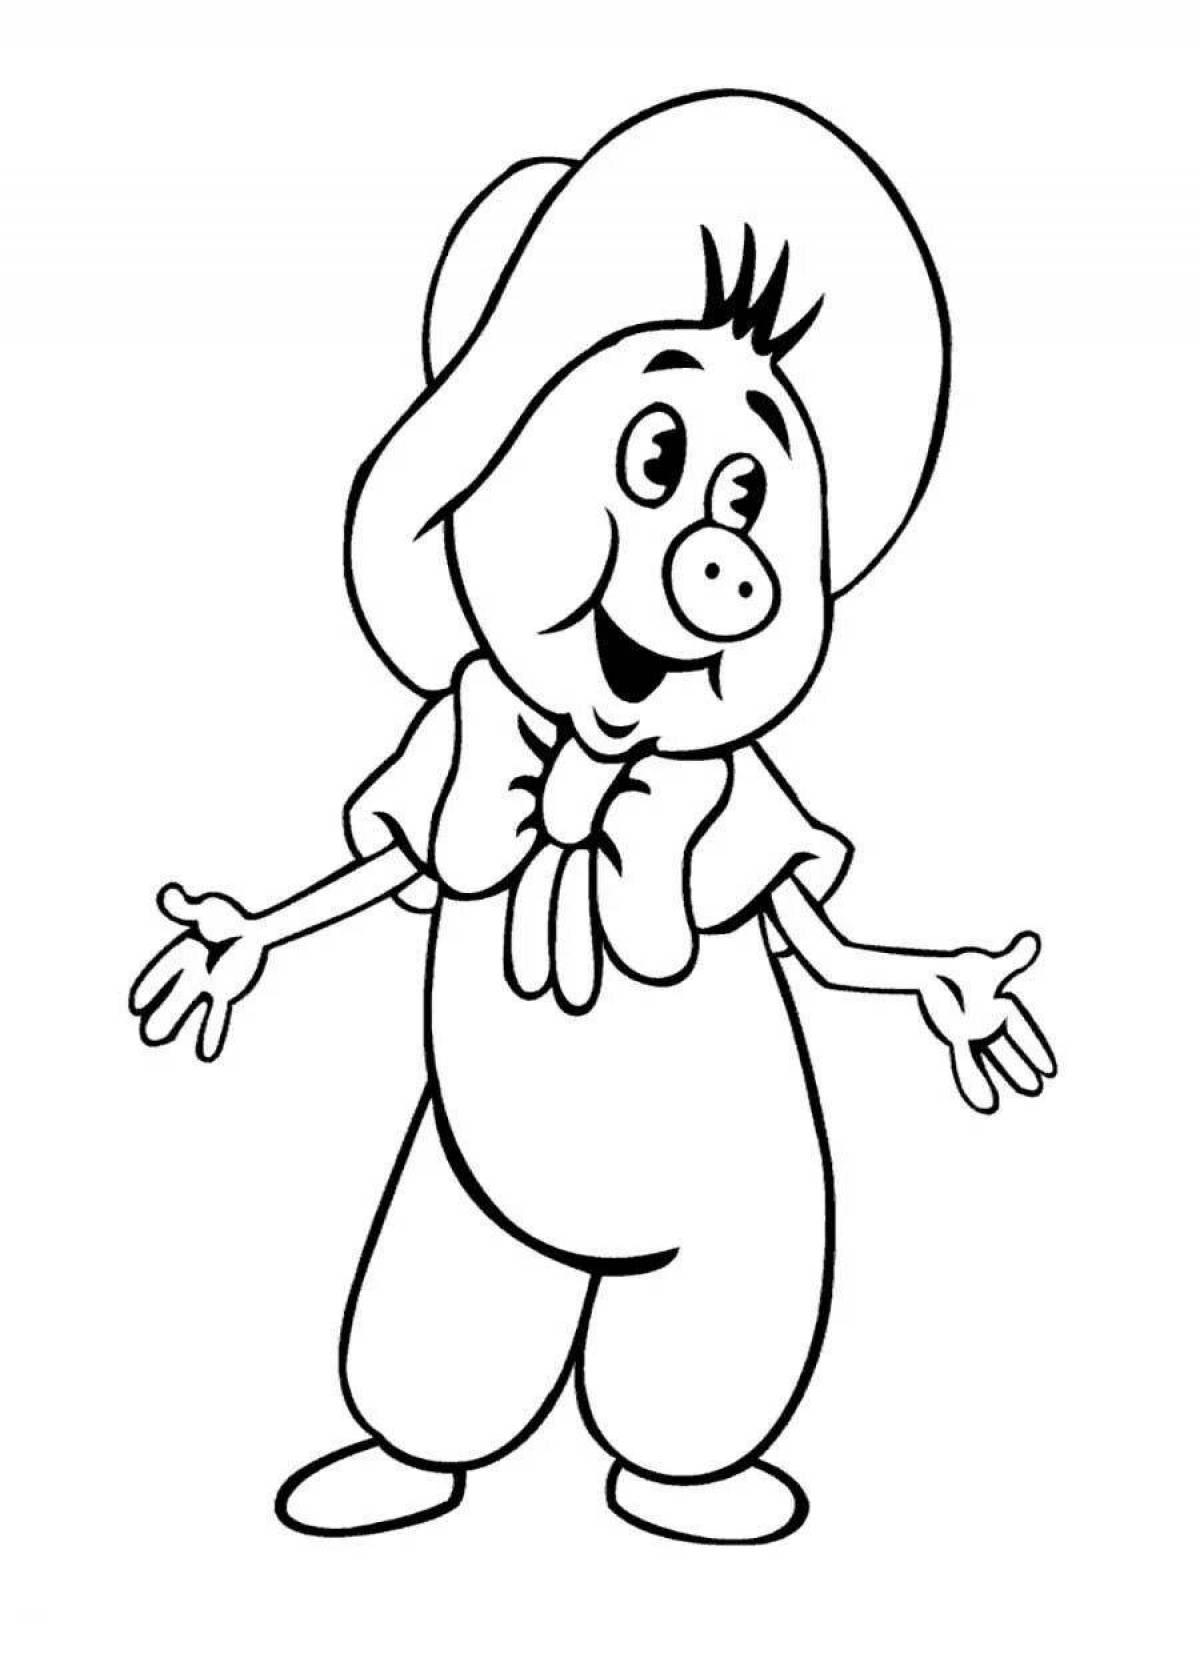 Fun cartoon characters coloring pages for kids